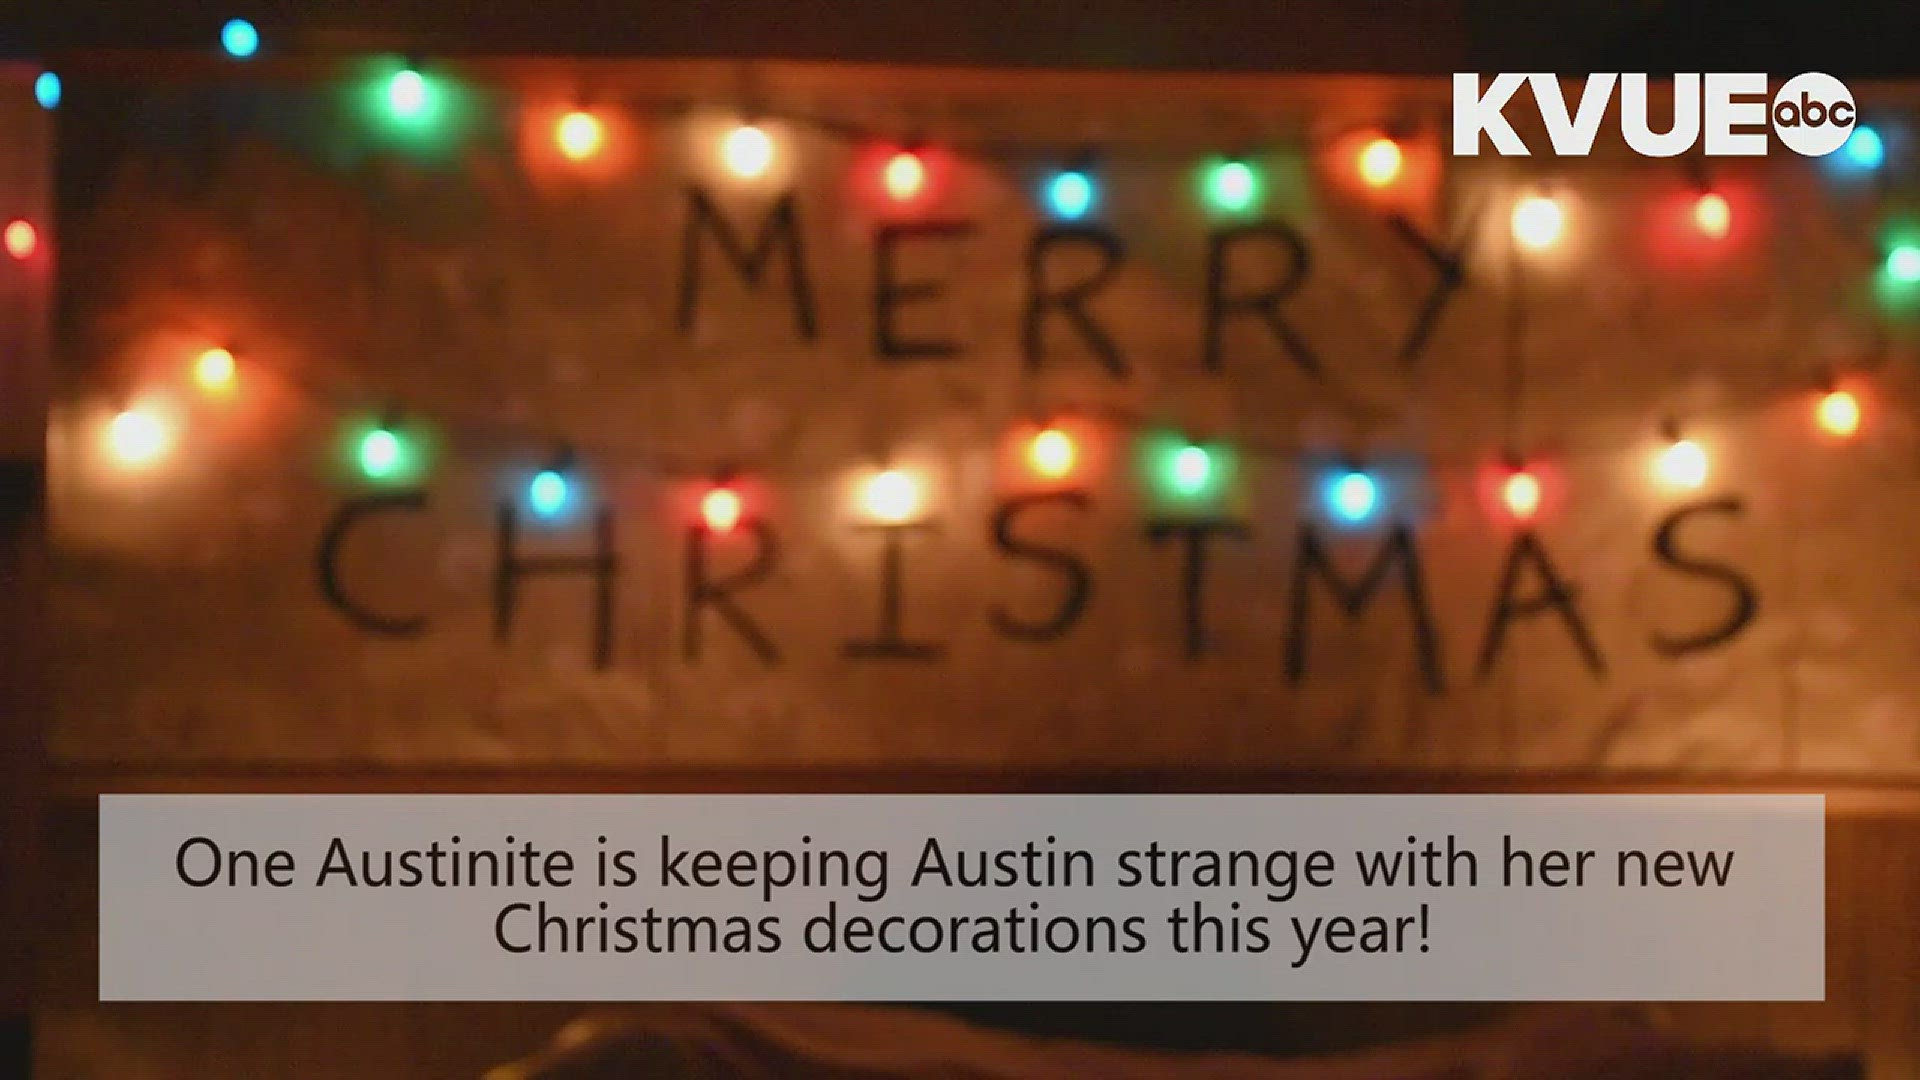 Check out this 'Stranger Things' themed Christmas display in Austin